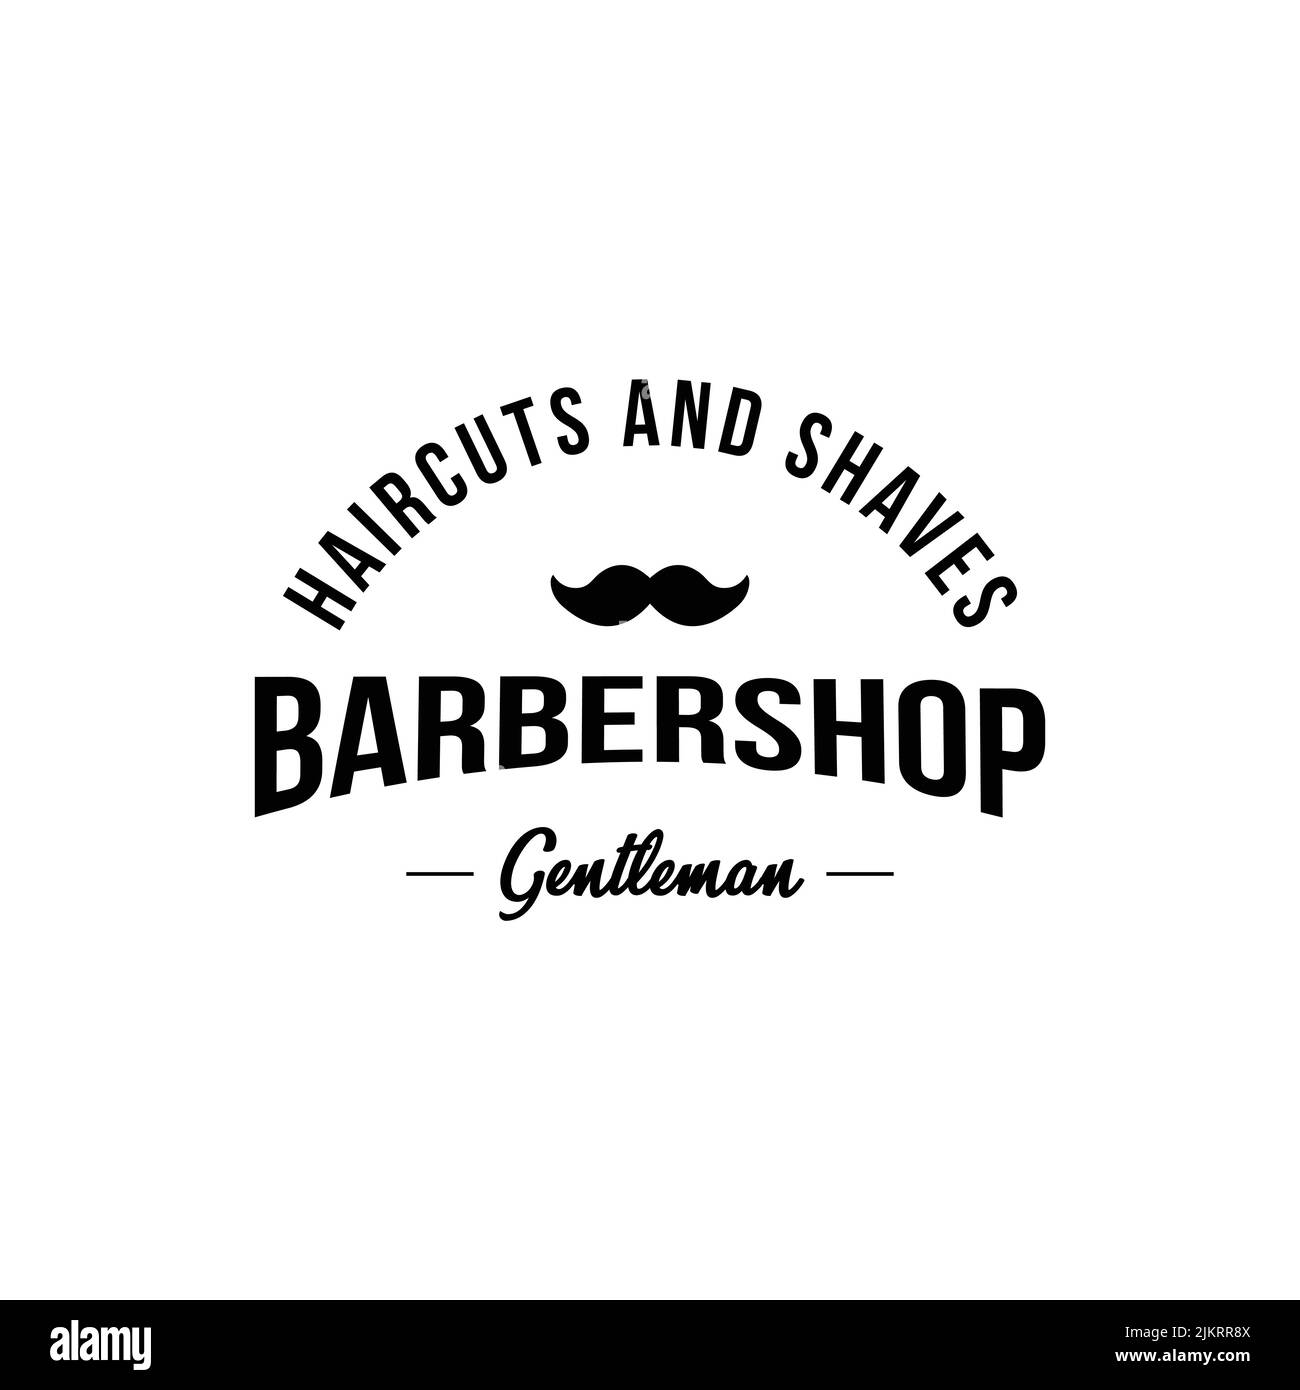 A haircuts and Shaves 'Barbershop' logo on a white background Stock Vector